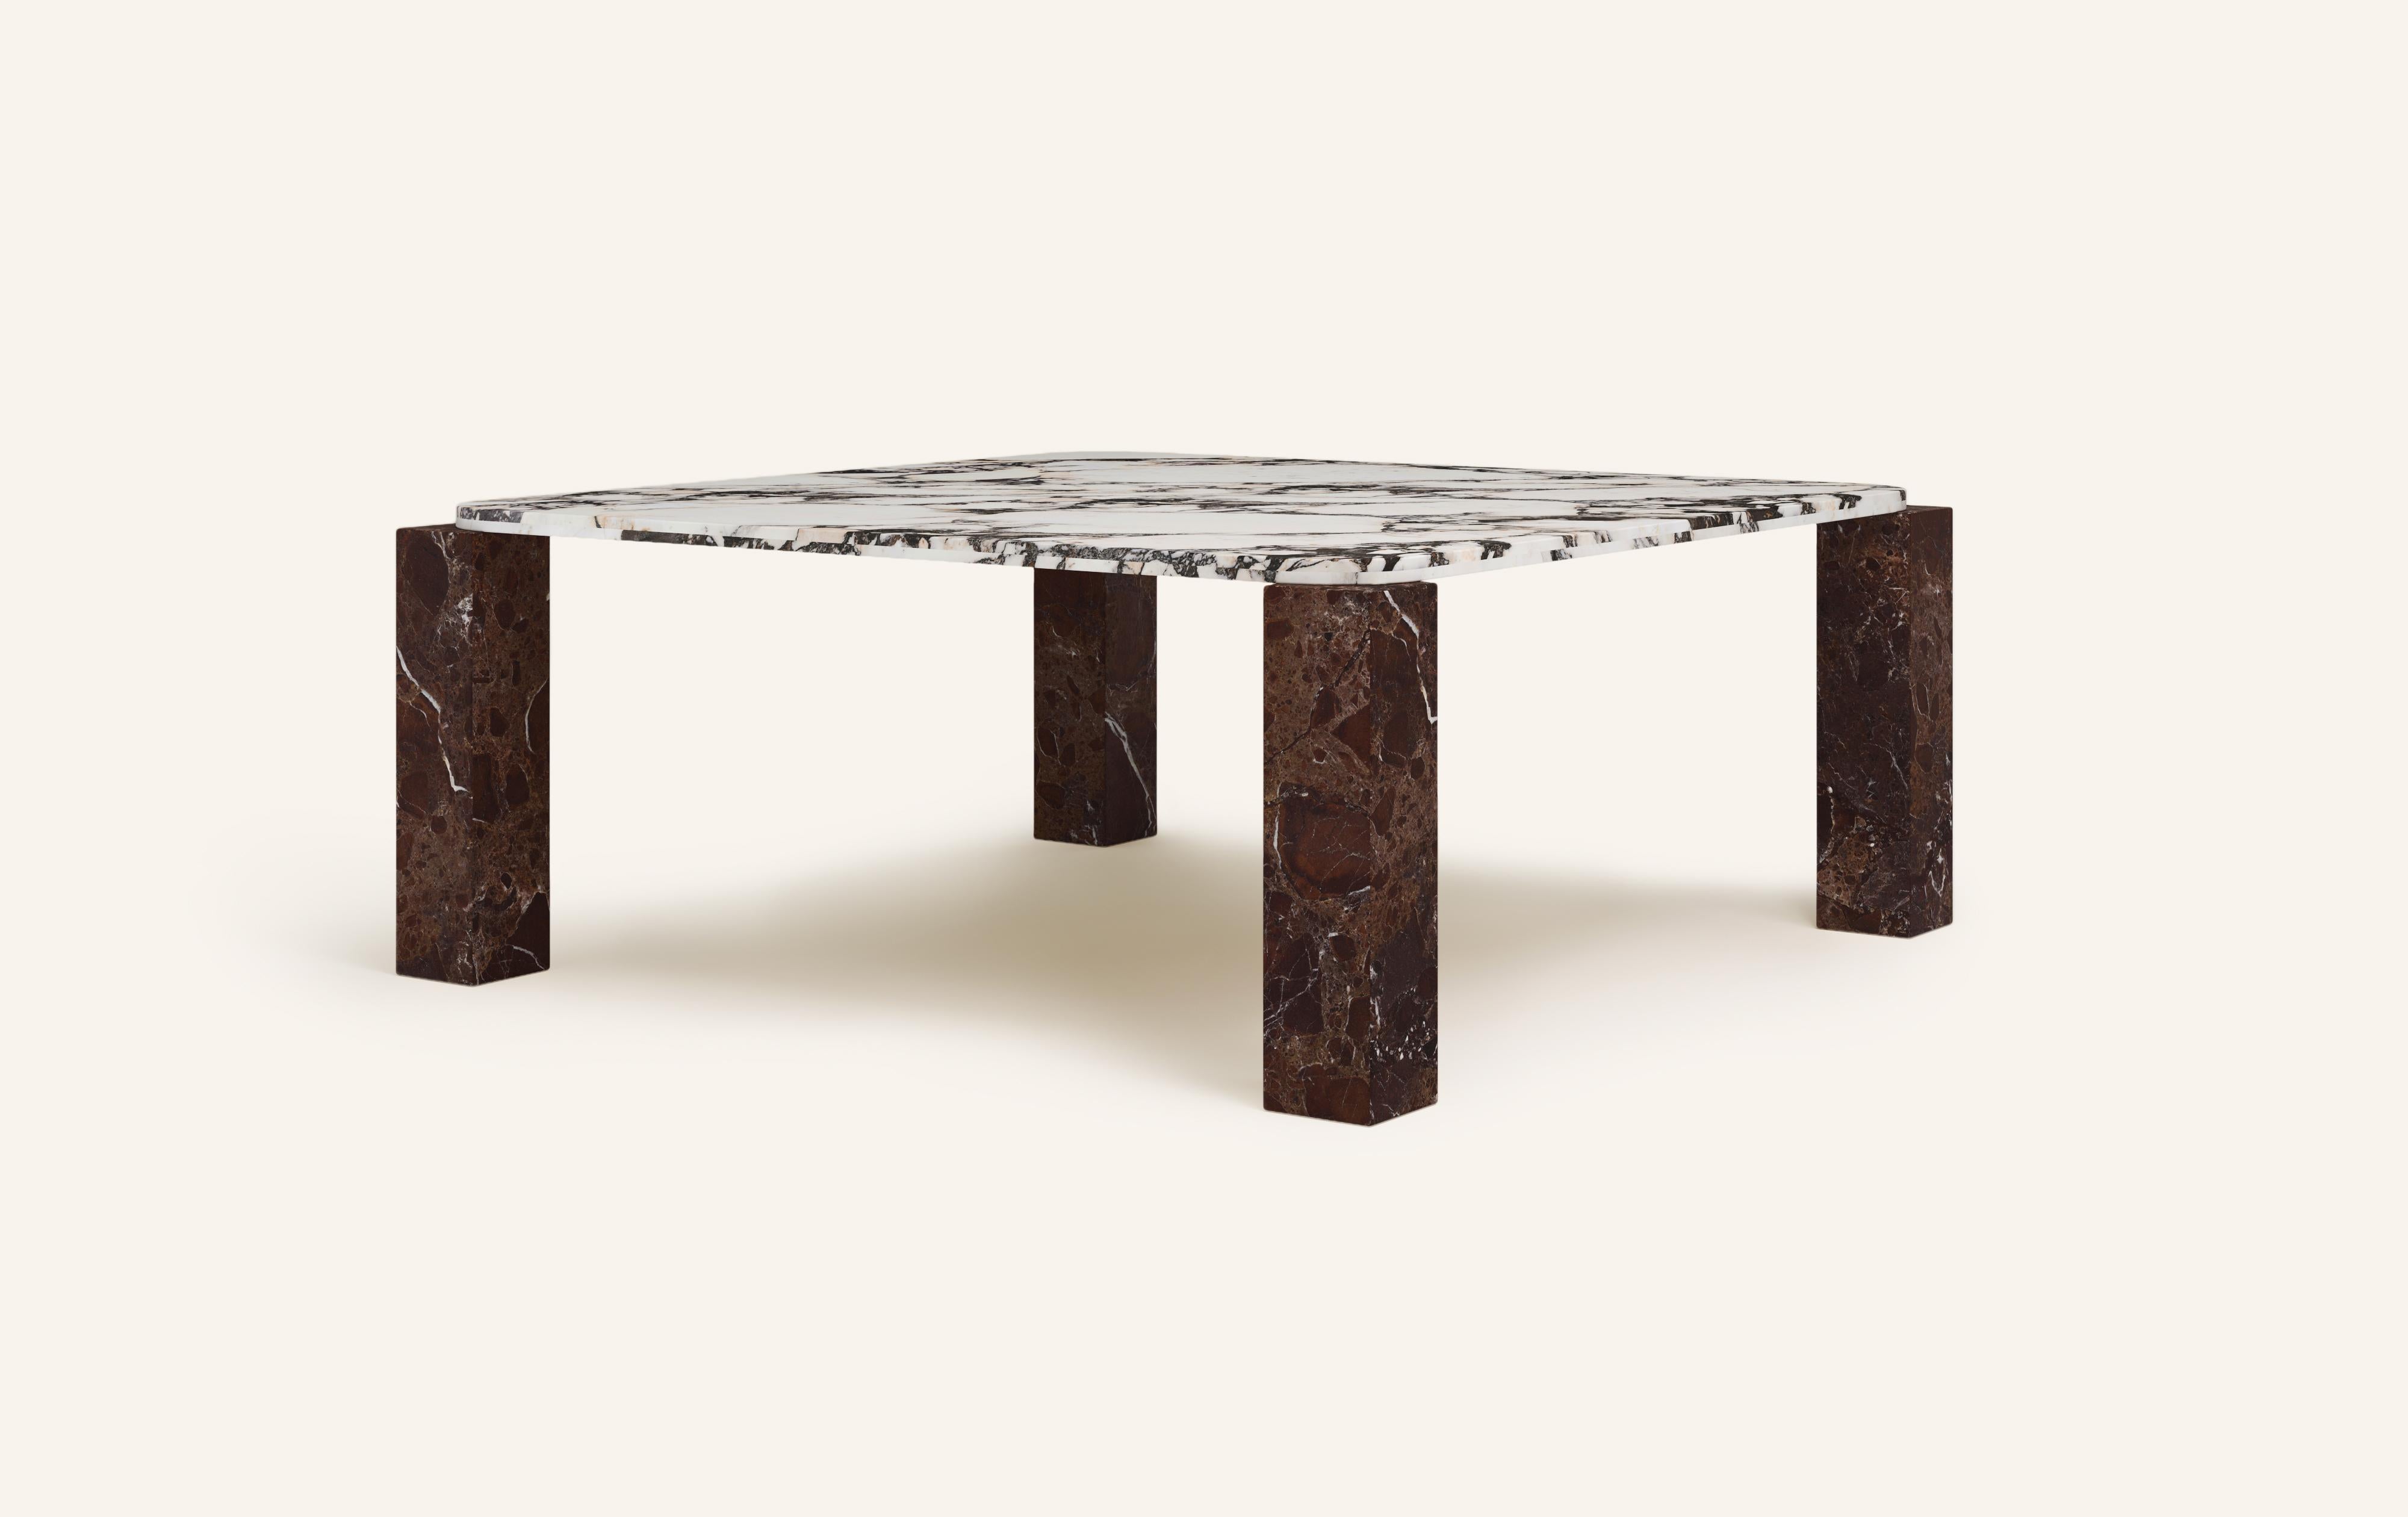 Organic Modern FORM(LA) Cubo Square Dining Table 74”L x 74”W x 30”H Viola & Rosso Marble For Sale